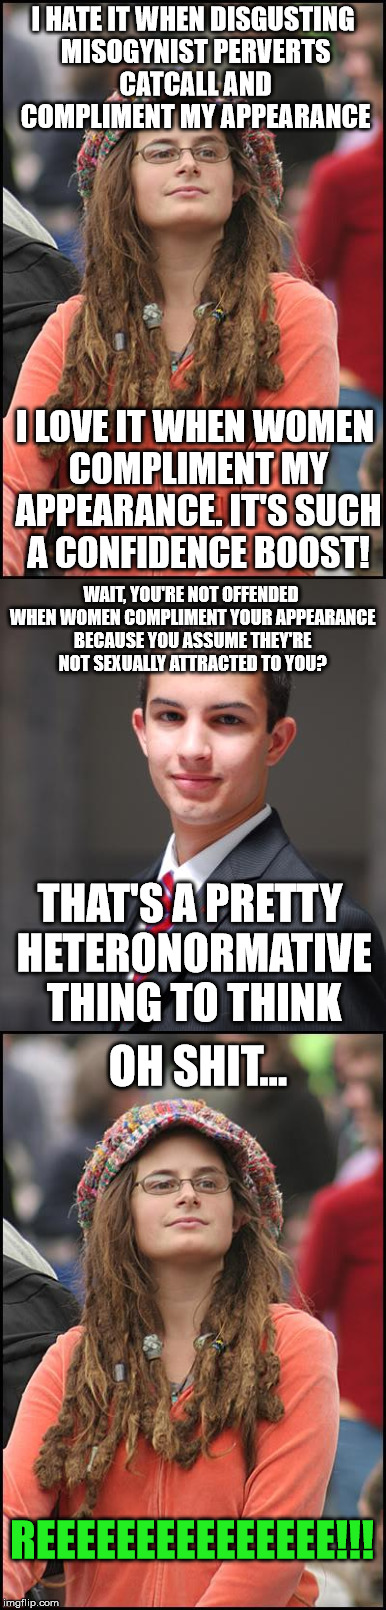 I HATE IT WHEN DISGUSTING MISOGYNIST PERVERTS CATCALL AND COMPLIMENT MY APPEARANCE; I LOVE IT WHEN WOMEN COMPLIMENT MY APPEARANCE. IT'S SUCH A CONFIDENCE BOOST! WAIT, YOU'RE NOT OFFENDED WHEN WOMEN COMPLIMENT YOUR APPEARANCE BECAUSE YOU ASSUME THEY'RE NOT SEXUALLY ATTRACTED TO YOU? THAT'S A PRETTY HETERONORMATIVE THING TO THINK; OH SHIT... REEEEEEEEEEEEEEE!!! | image tagged in college liberal,college conservative | made w/ Imgflip meme maker